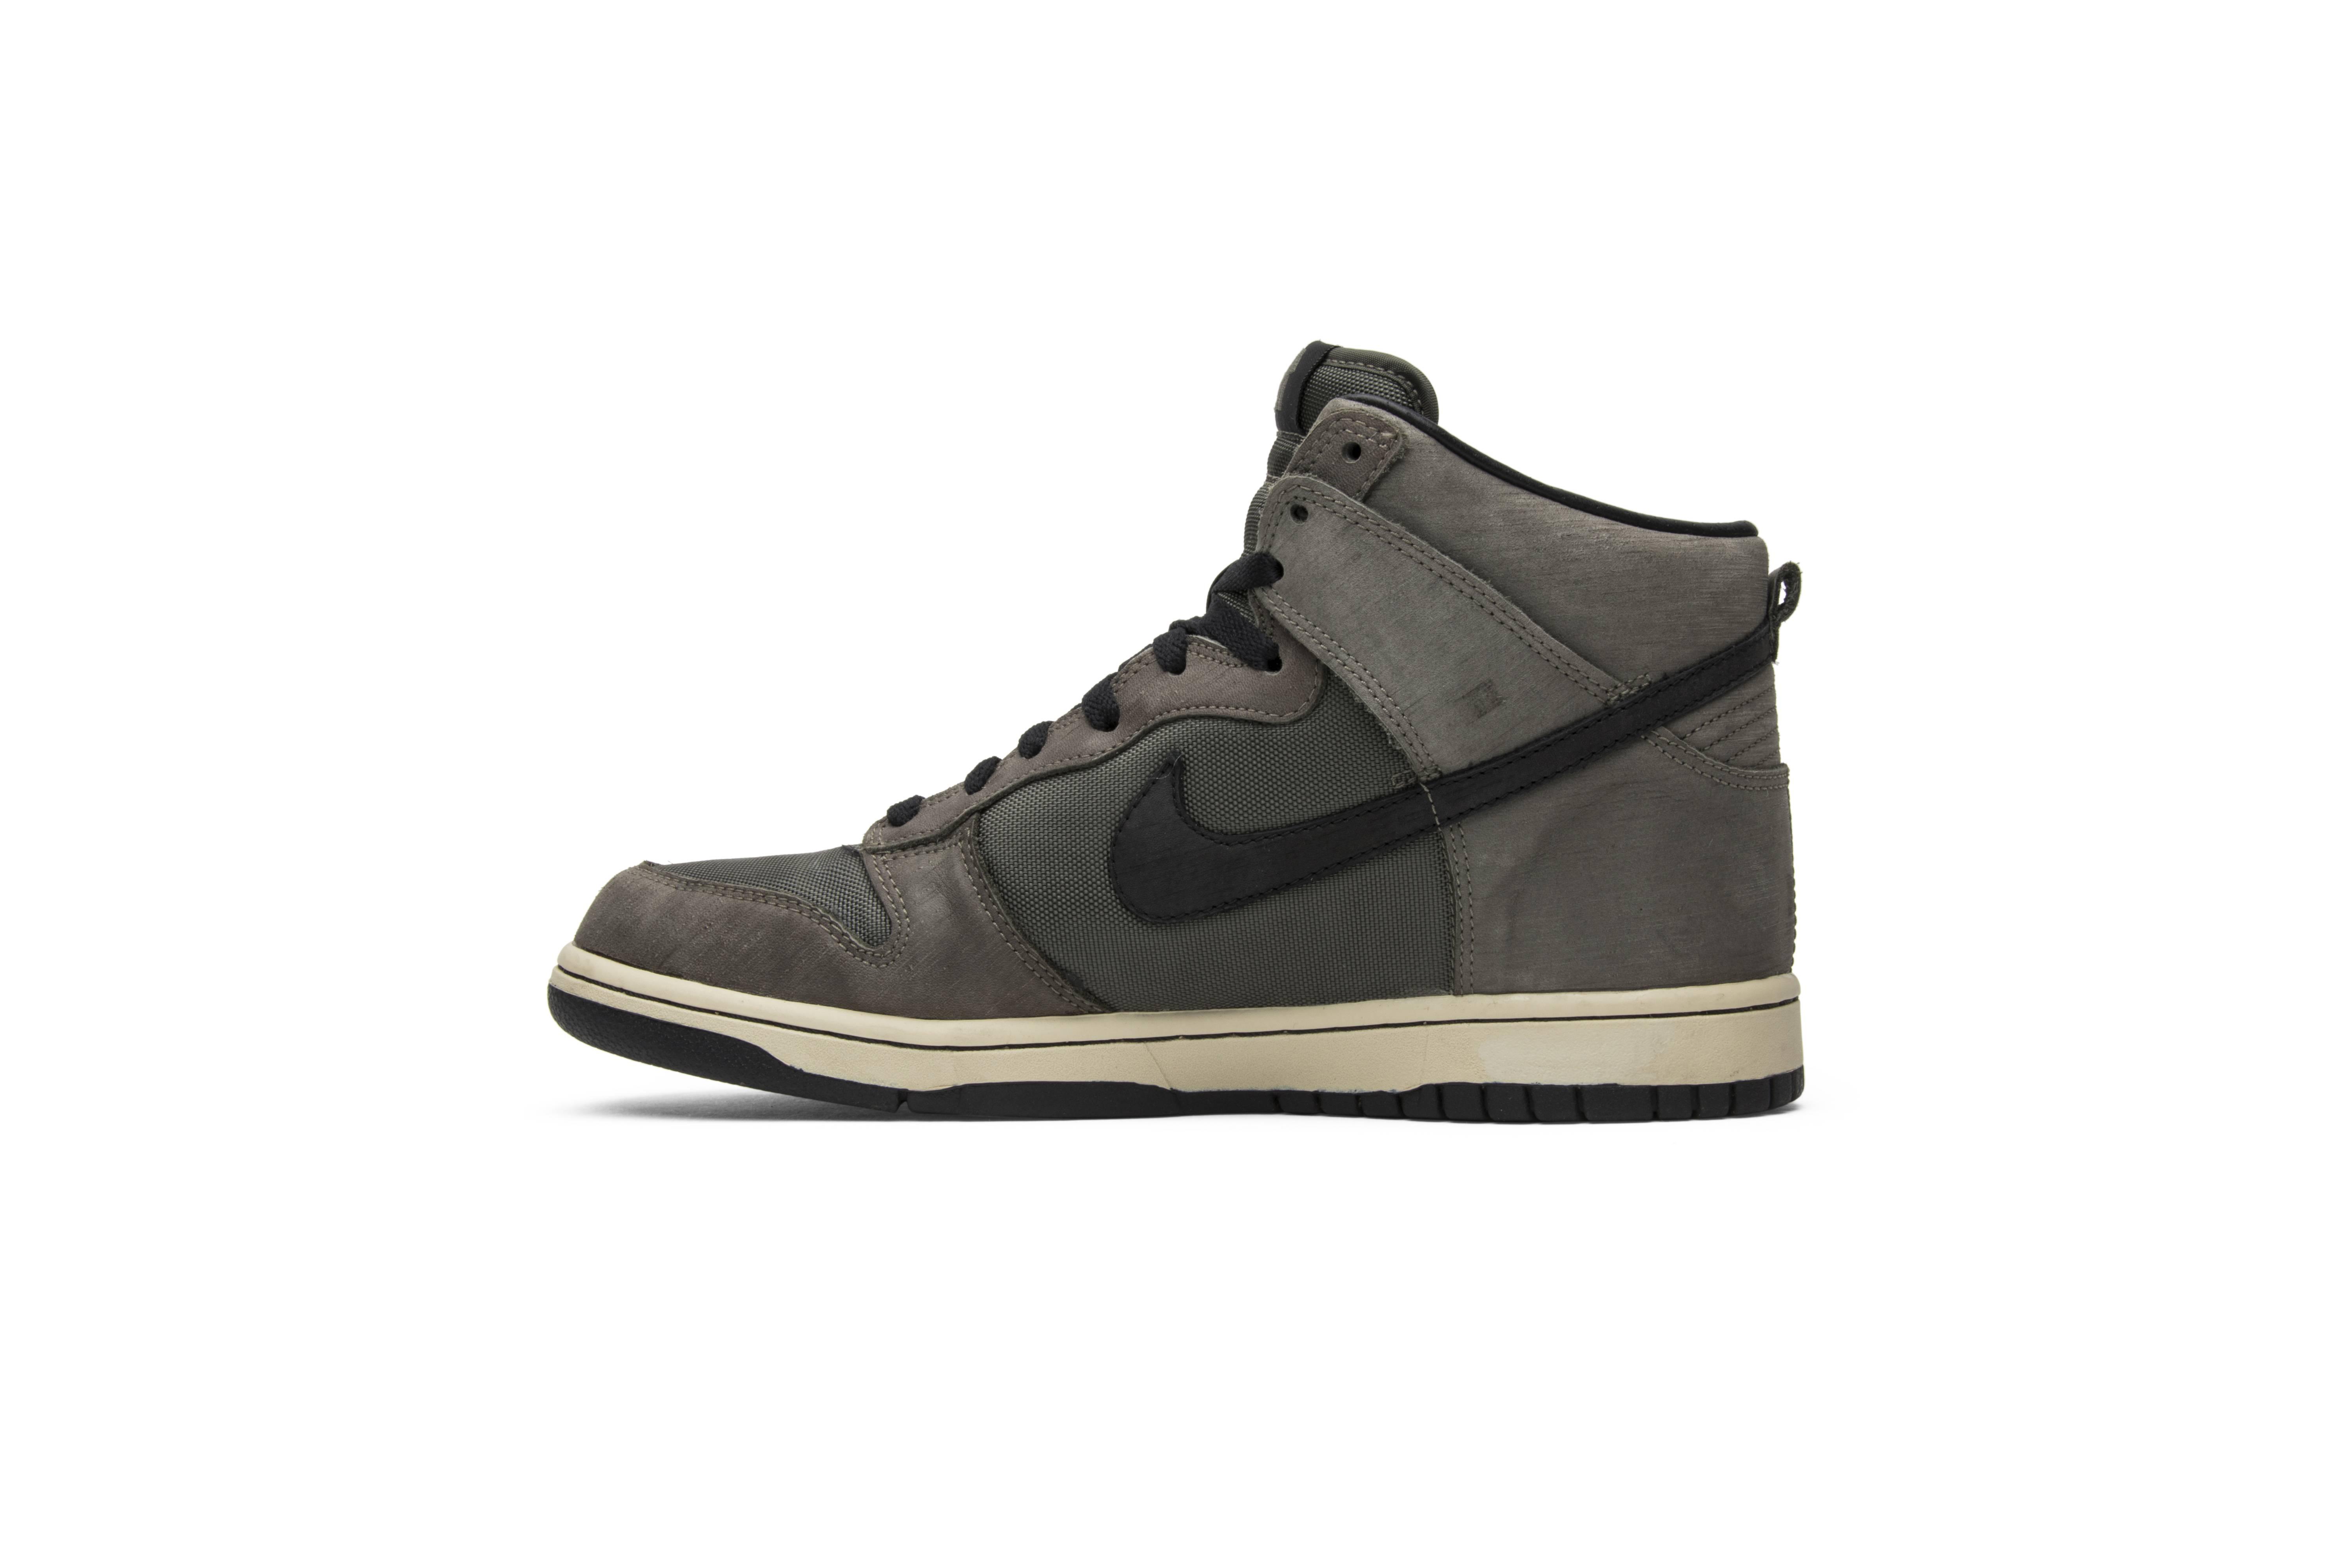 Nike Undefeated X Dunk High Premium Sp in Grey (Gray) for Men - Lyst